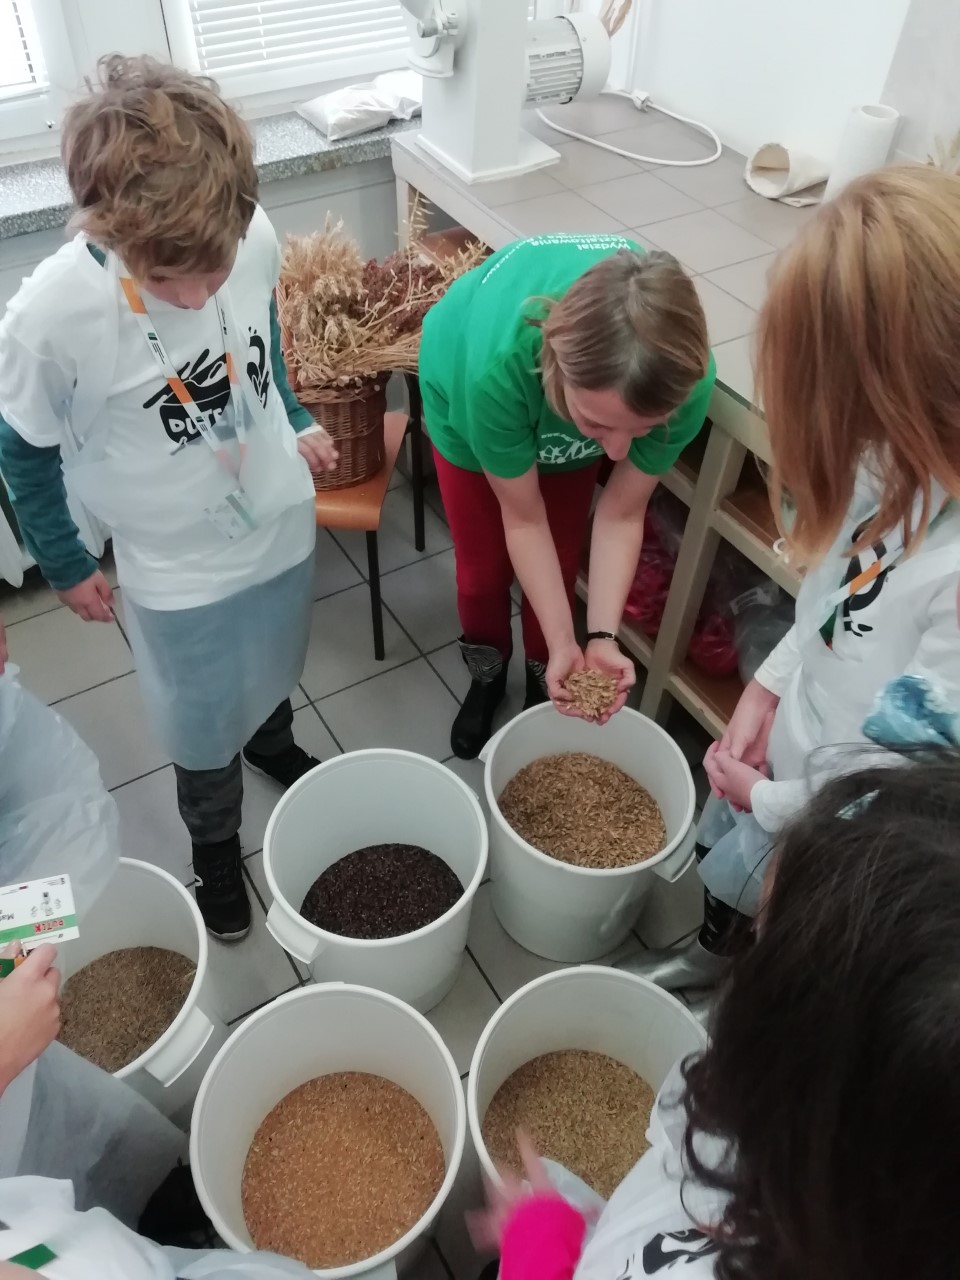 Several children are standing around four buckets half full of different types of grain. One of the girls picks up a handful of grain